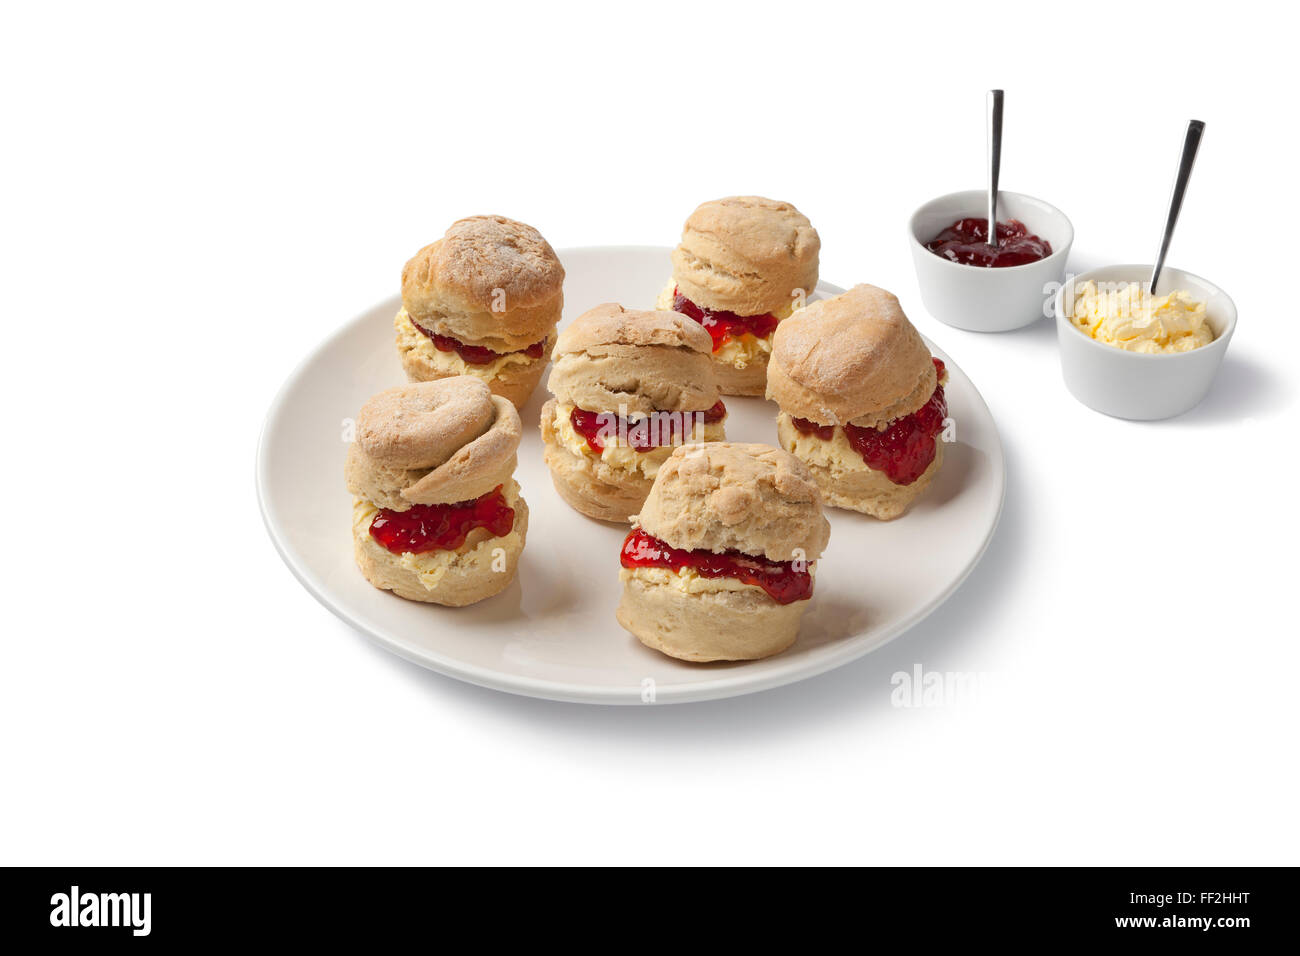 Fresh baked scones with clotted cream and jam on white background Stock Photo